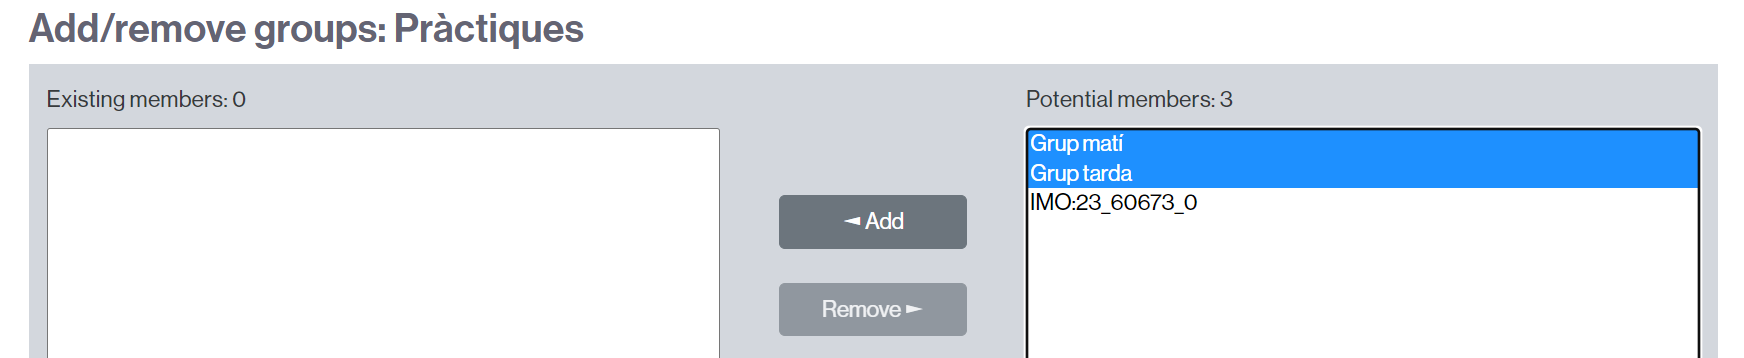 Group selection and button to add them to a grouping